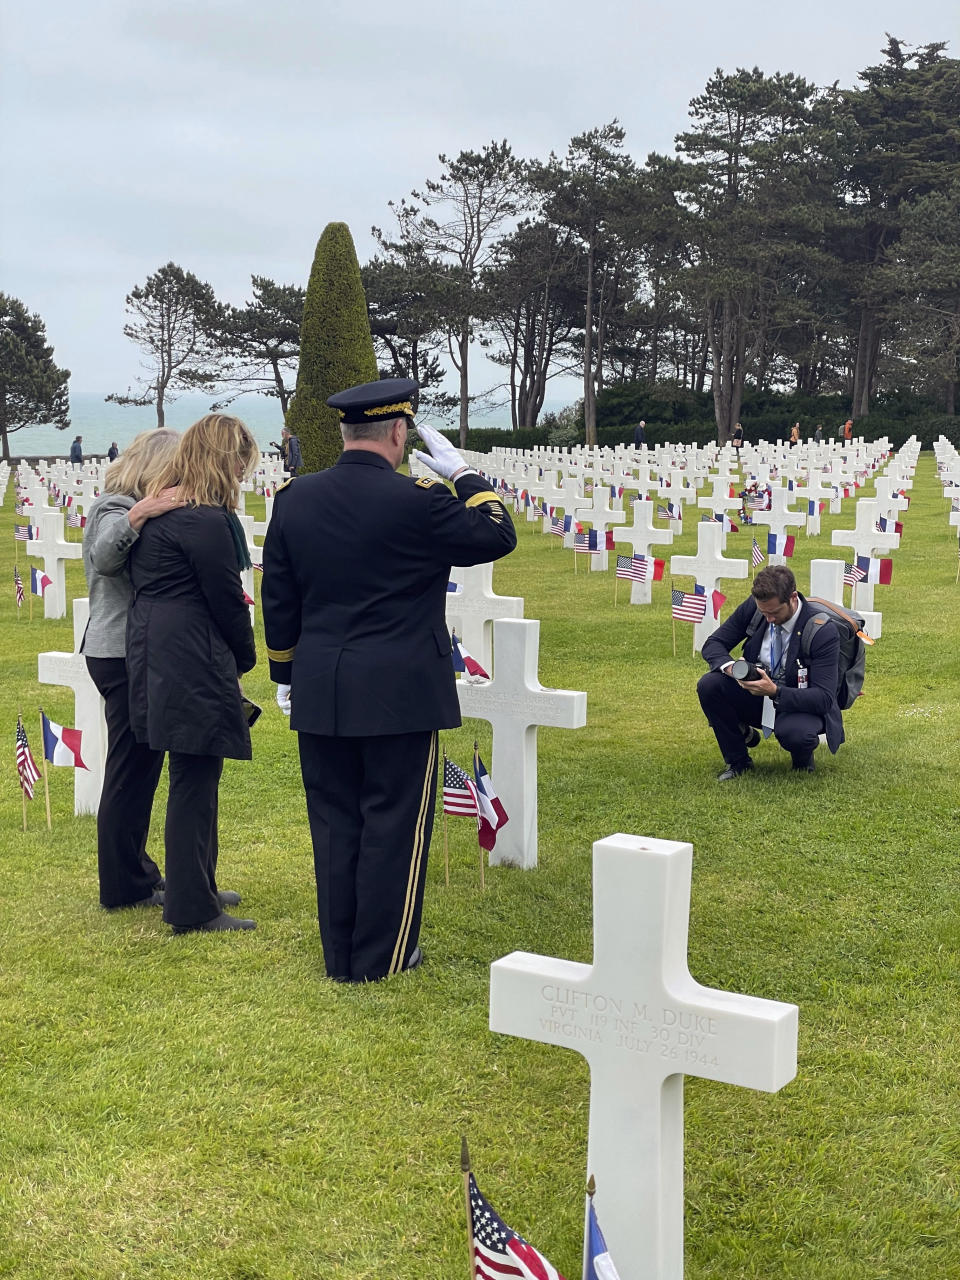 Associated Press reporter Tara Copp, second from left, stands with Joint Chiefs Chairman Gen. Mark Milley, third from left, and his wife Hollyanne, as they pause at the Normandy American Cemetery gravesite of Pfc. Terry Harris, Copp's great-uncle, in Colleville-sur-Mer, Normandy, France, June 6, 2023. Copp was covering Milley's last trip to Normandy as a U.S. soldier. Milley served in both airborne divisions who jumped into Normandy on June 6, 1944, and commanded the 506th Parachute Infantry Regiment, which was Harris' unit. (Oren Lieberman/CNN via AP)